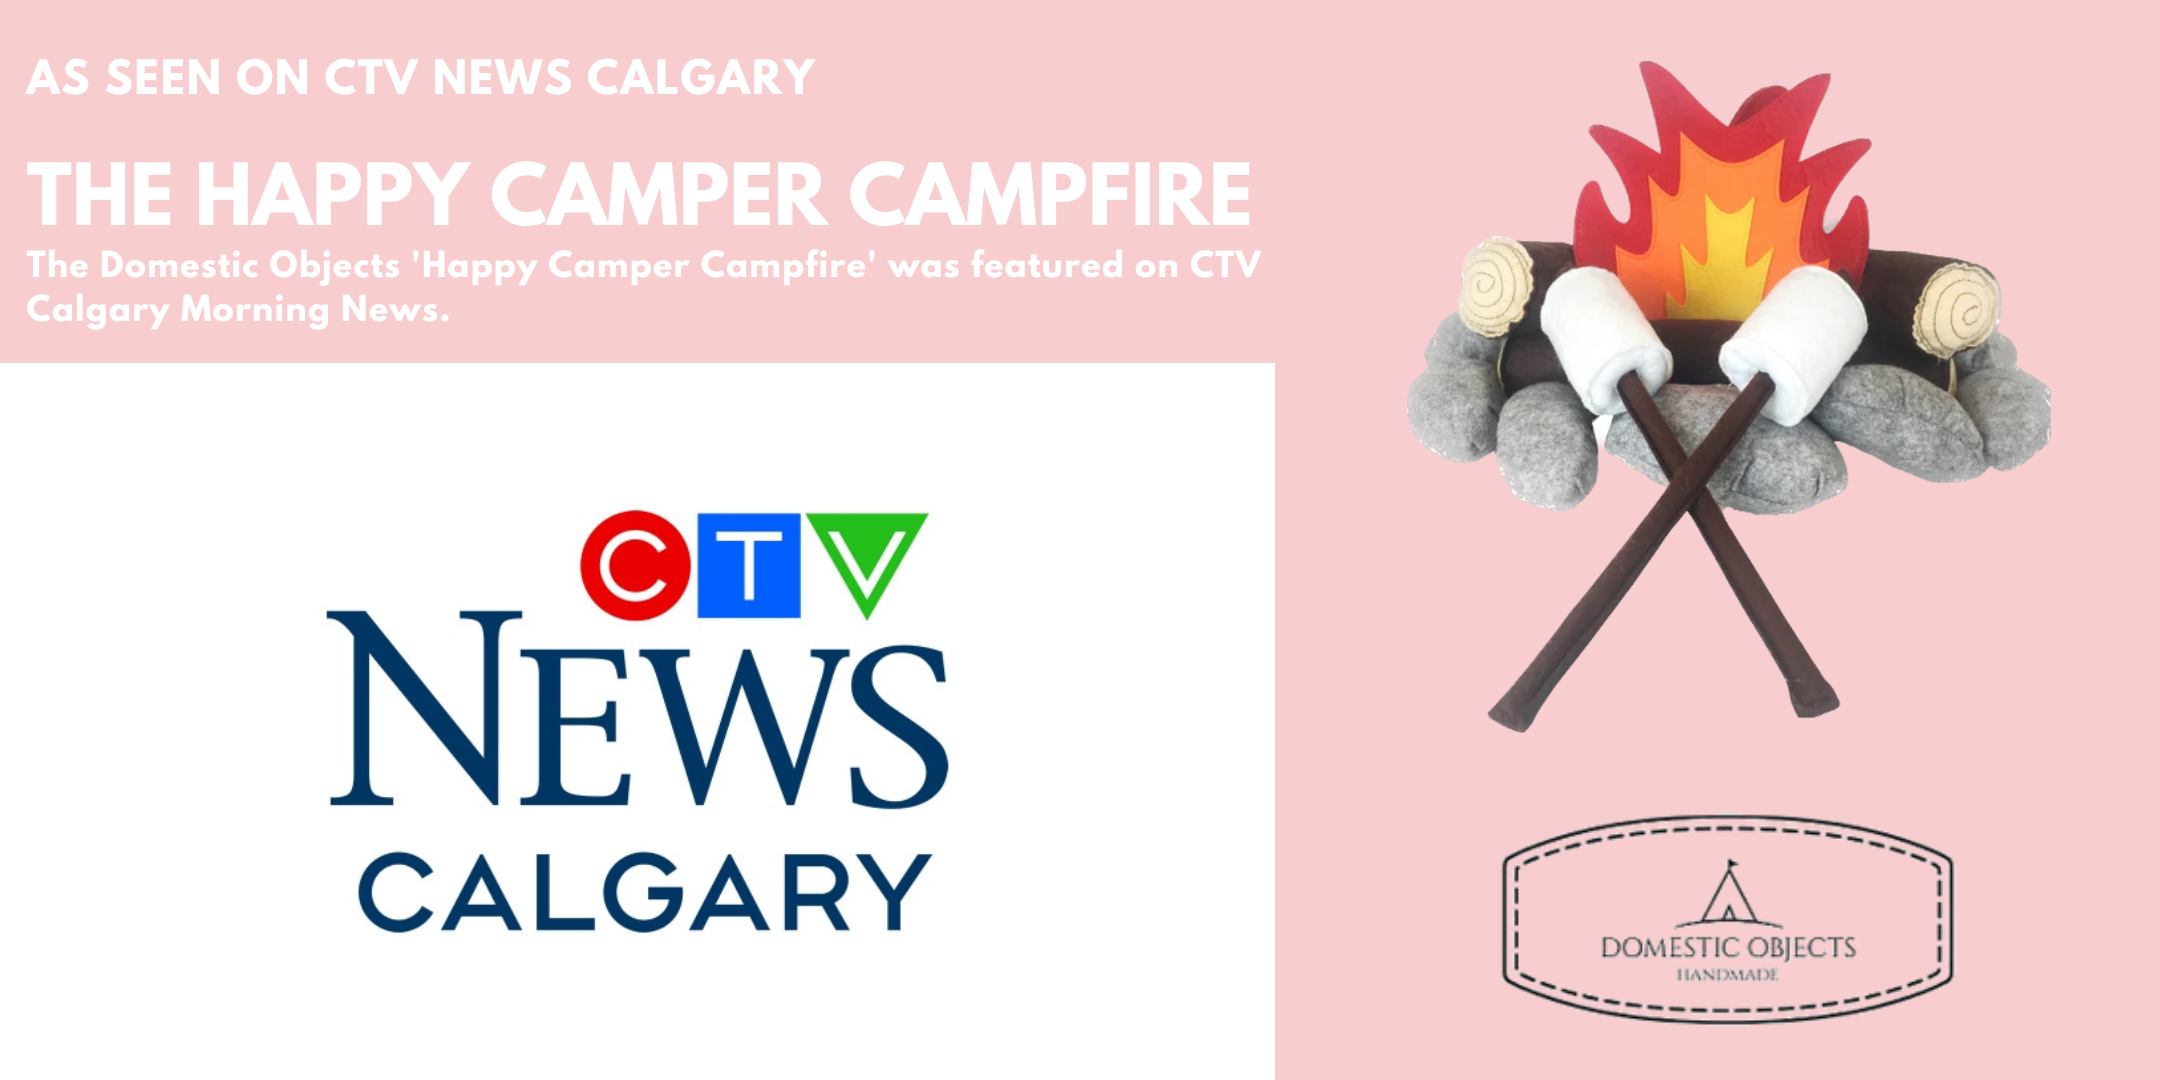 Domestic Objects on CTV News Calgary Indoor Camping Toys